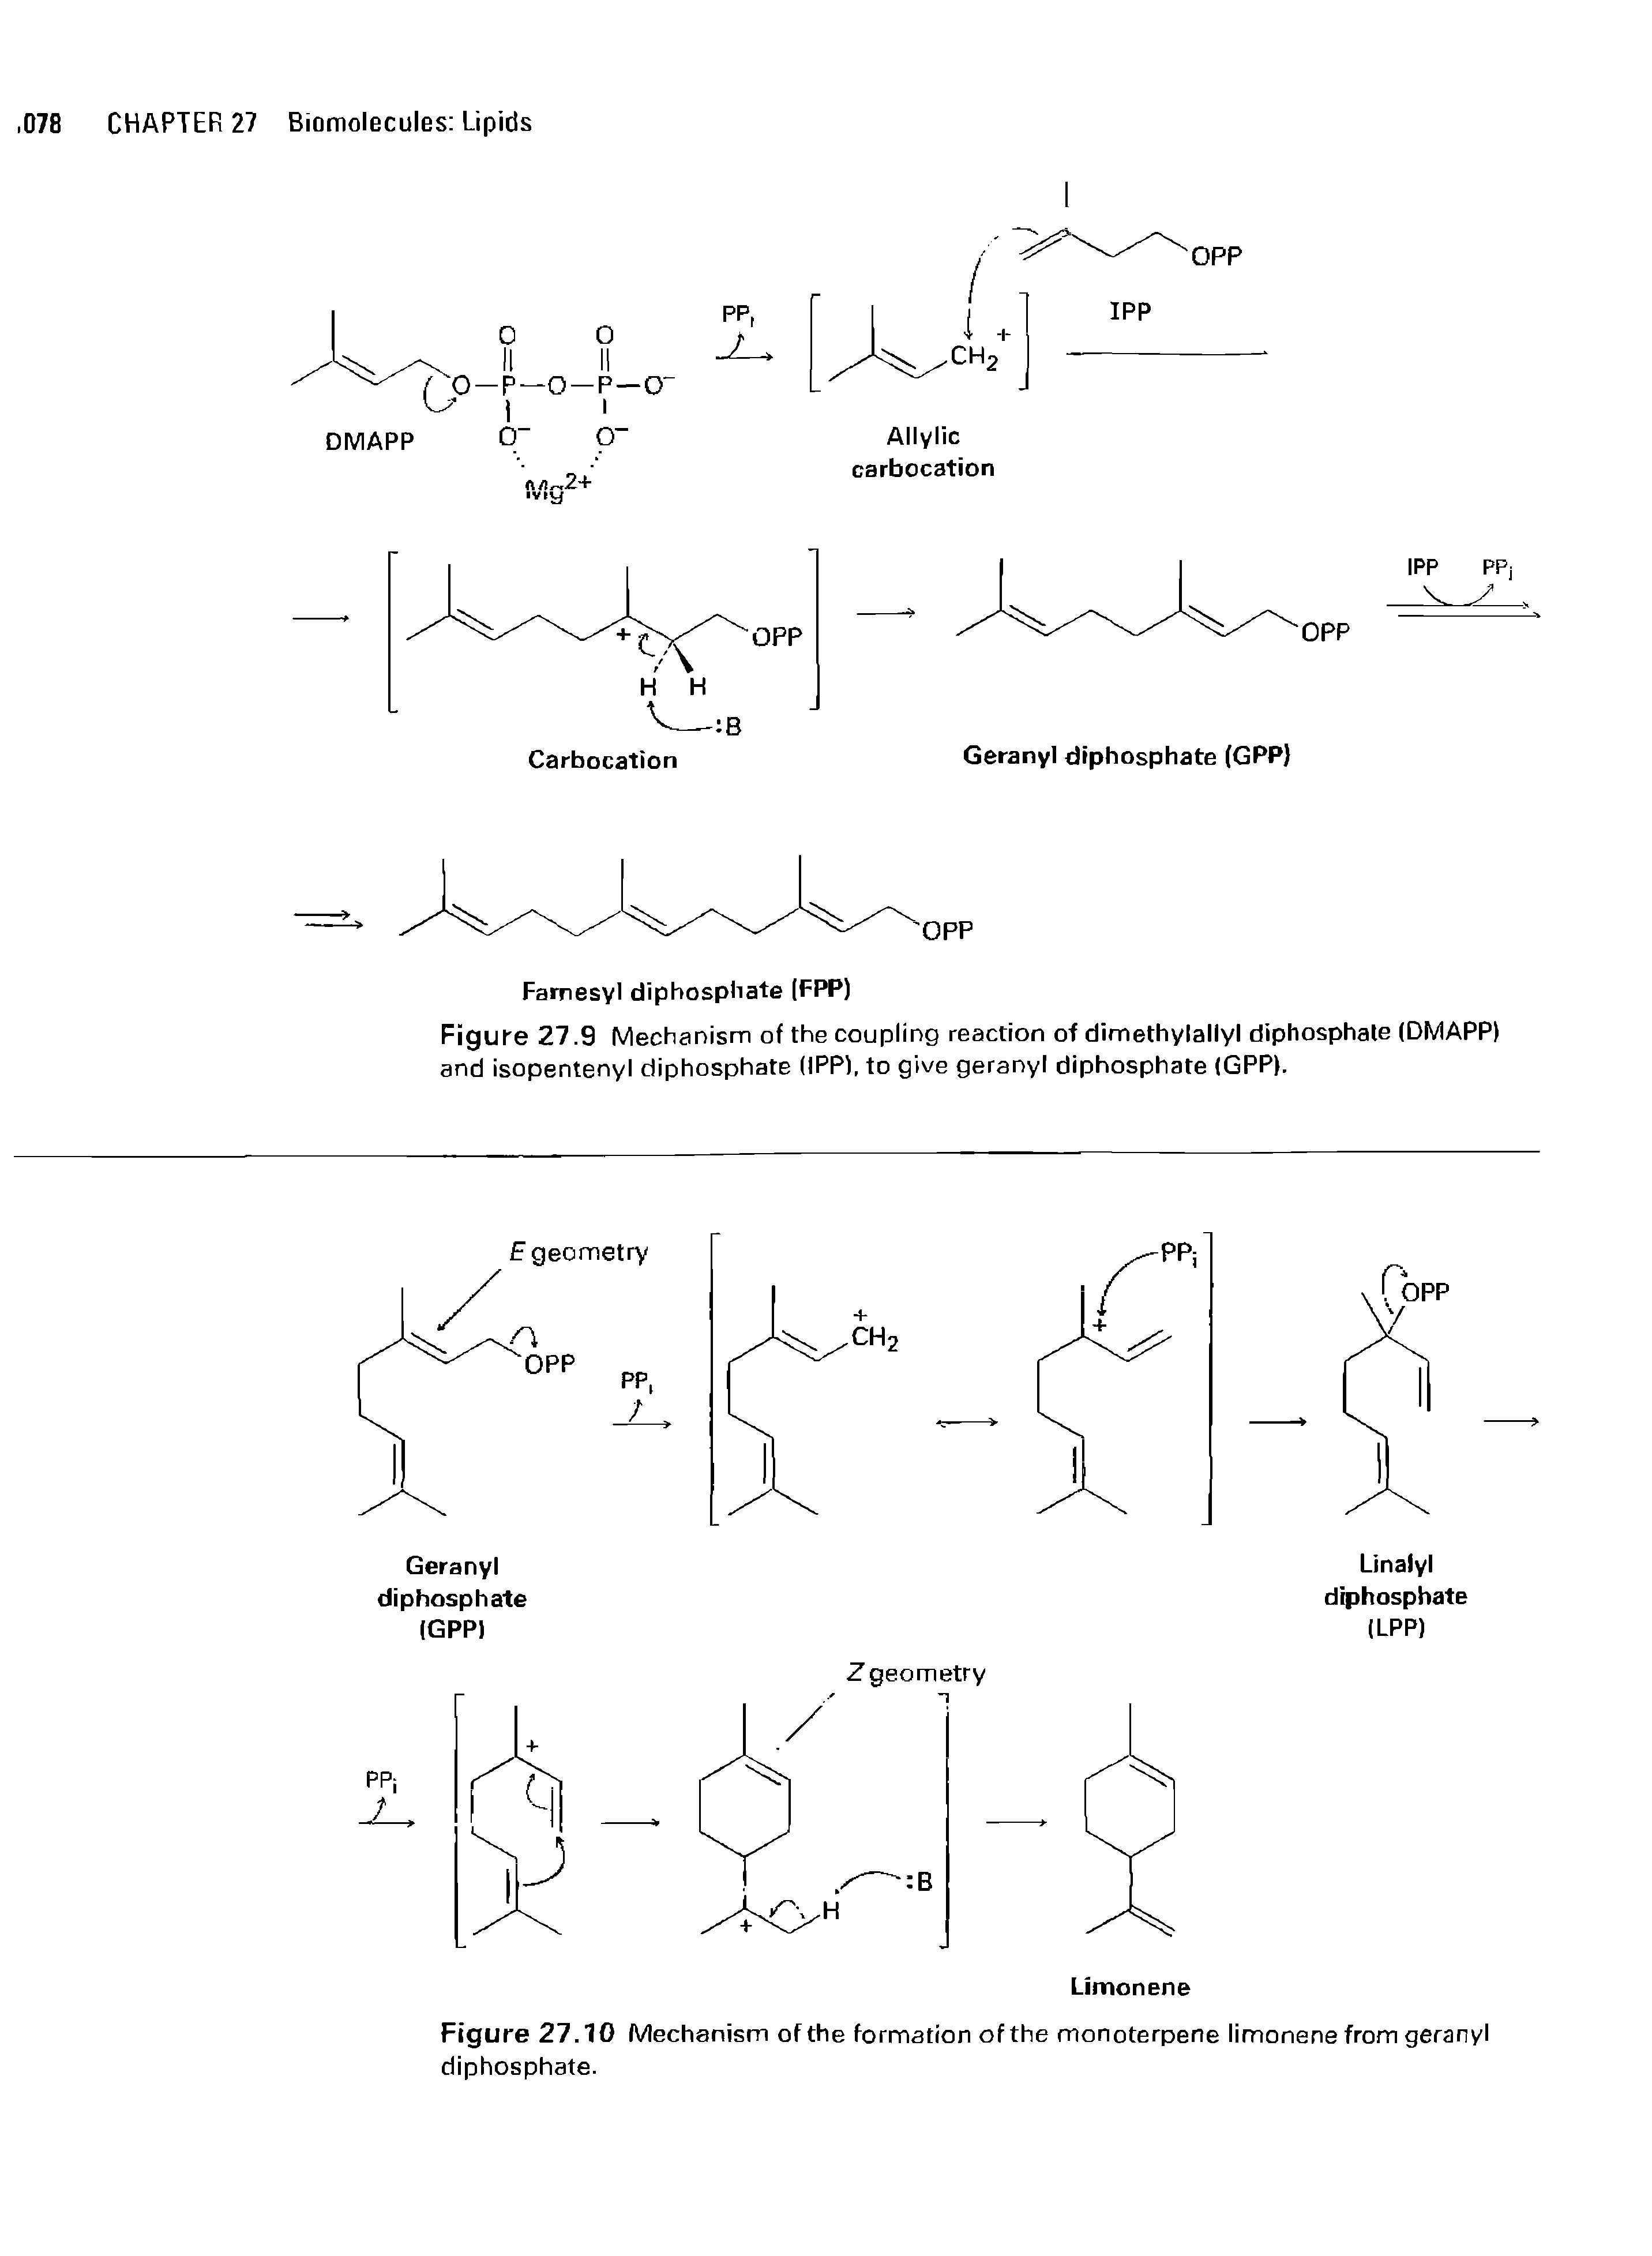 Figure 27.9 Mechanism of the coupling reaction of dimethylallyl diphosphate (DMAPP) and isopentenyl diphosphate (IPP), to give geranyl diphosphate (GPP).